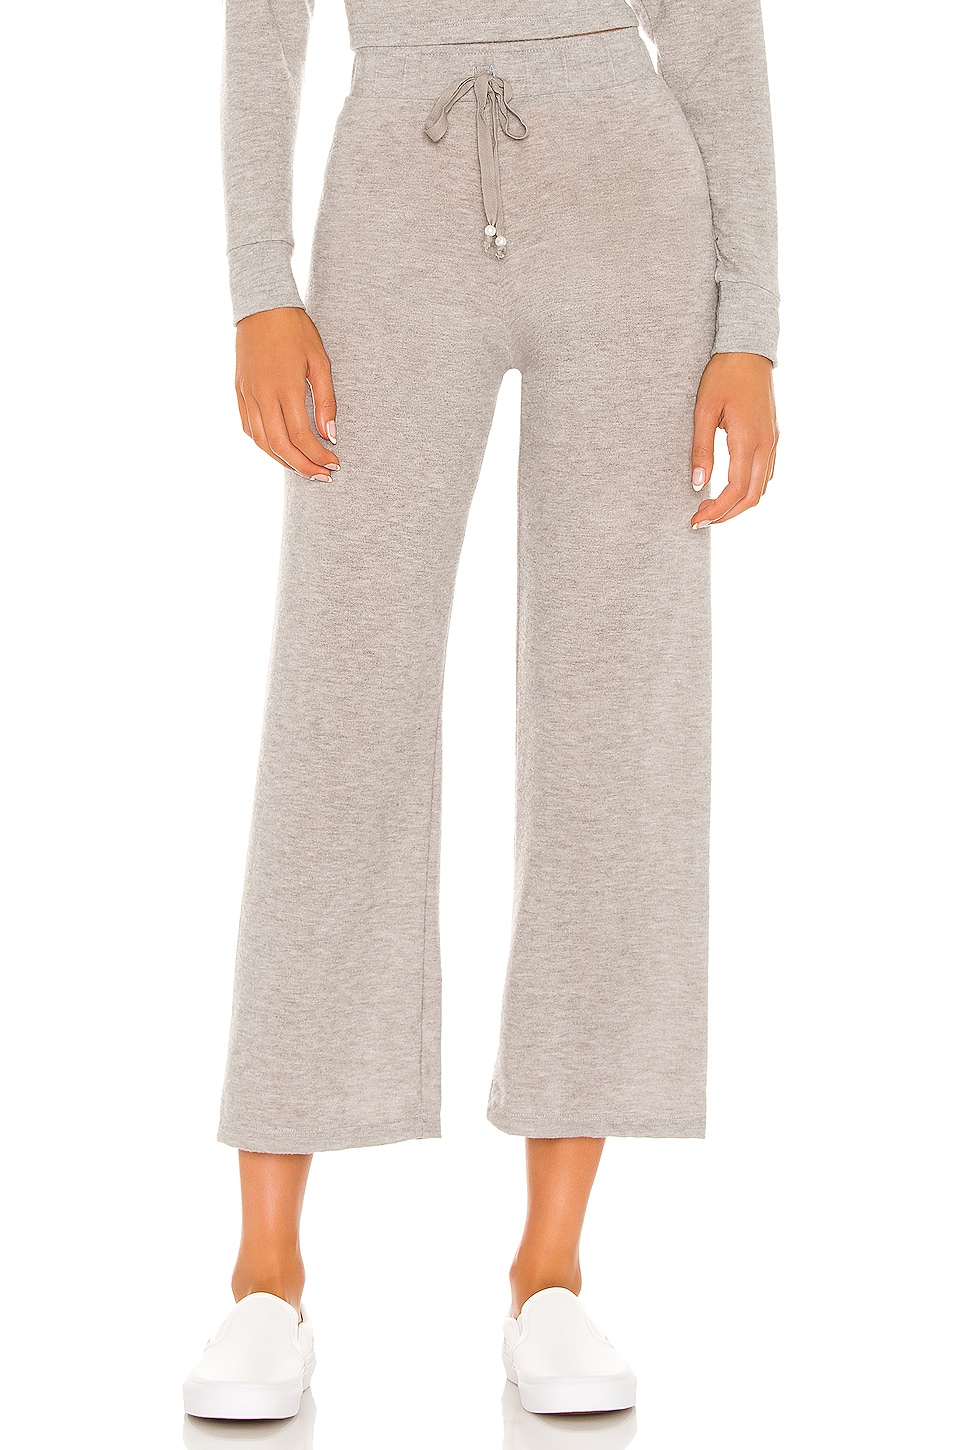 DONNI. Sweater Cropped Flare Sweatpant Heather